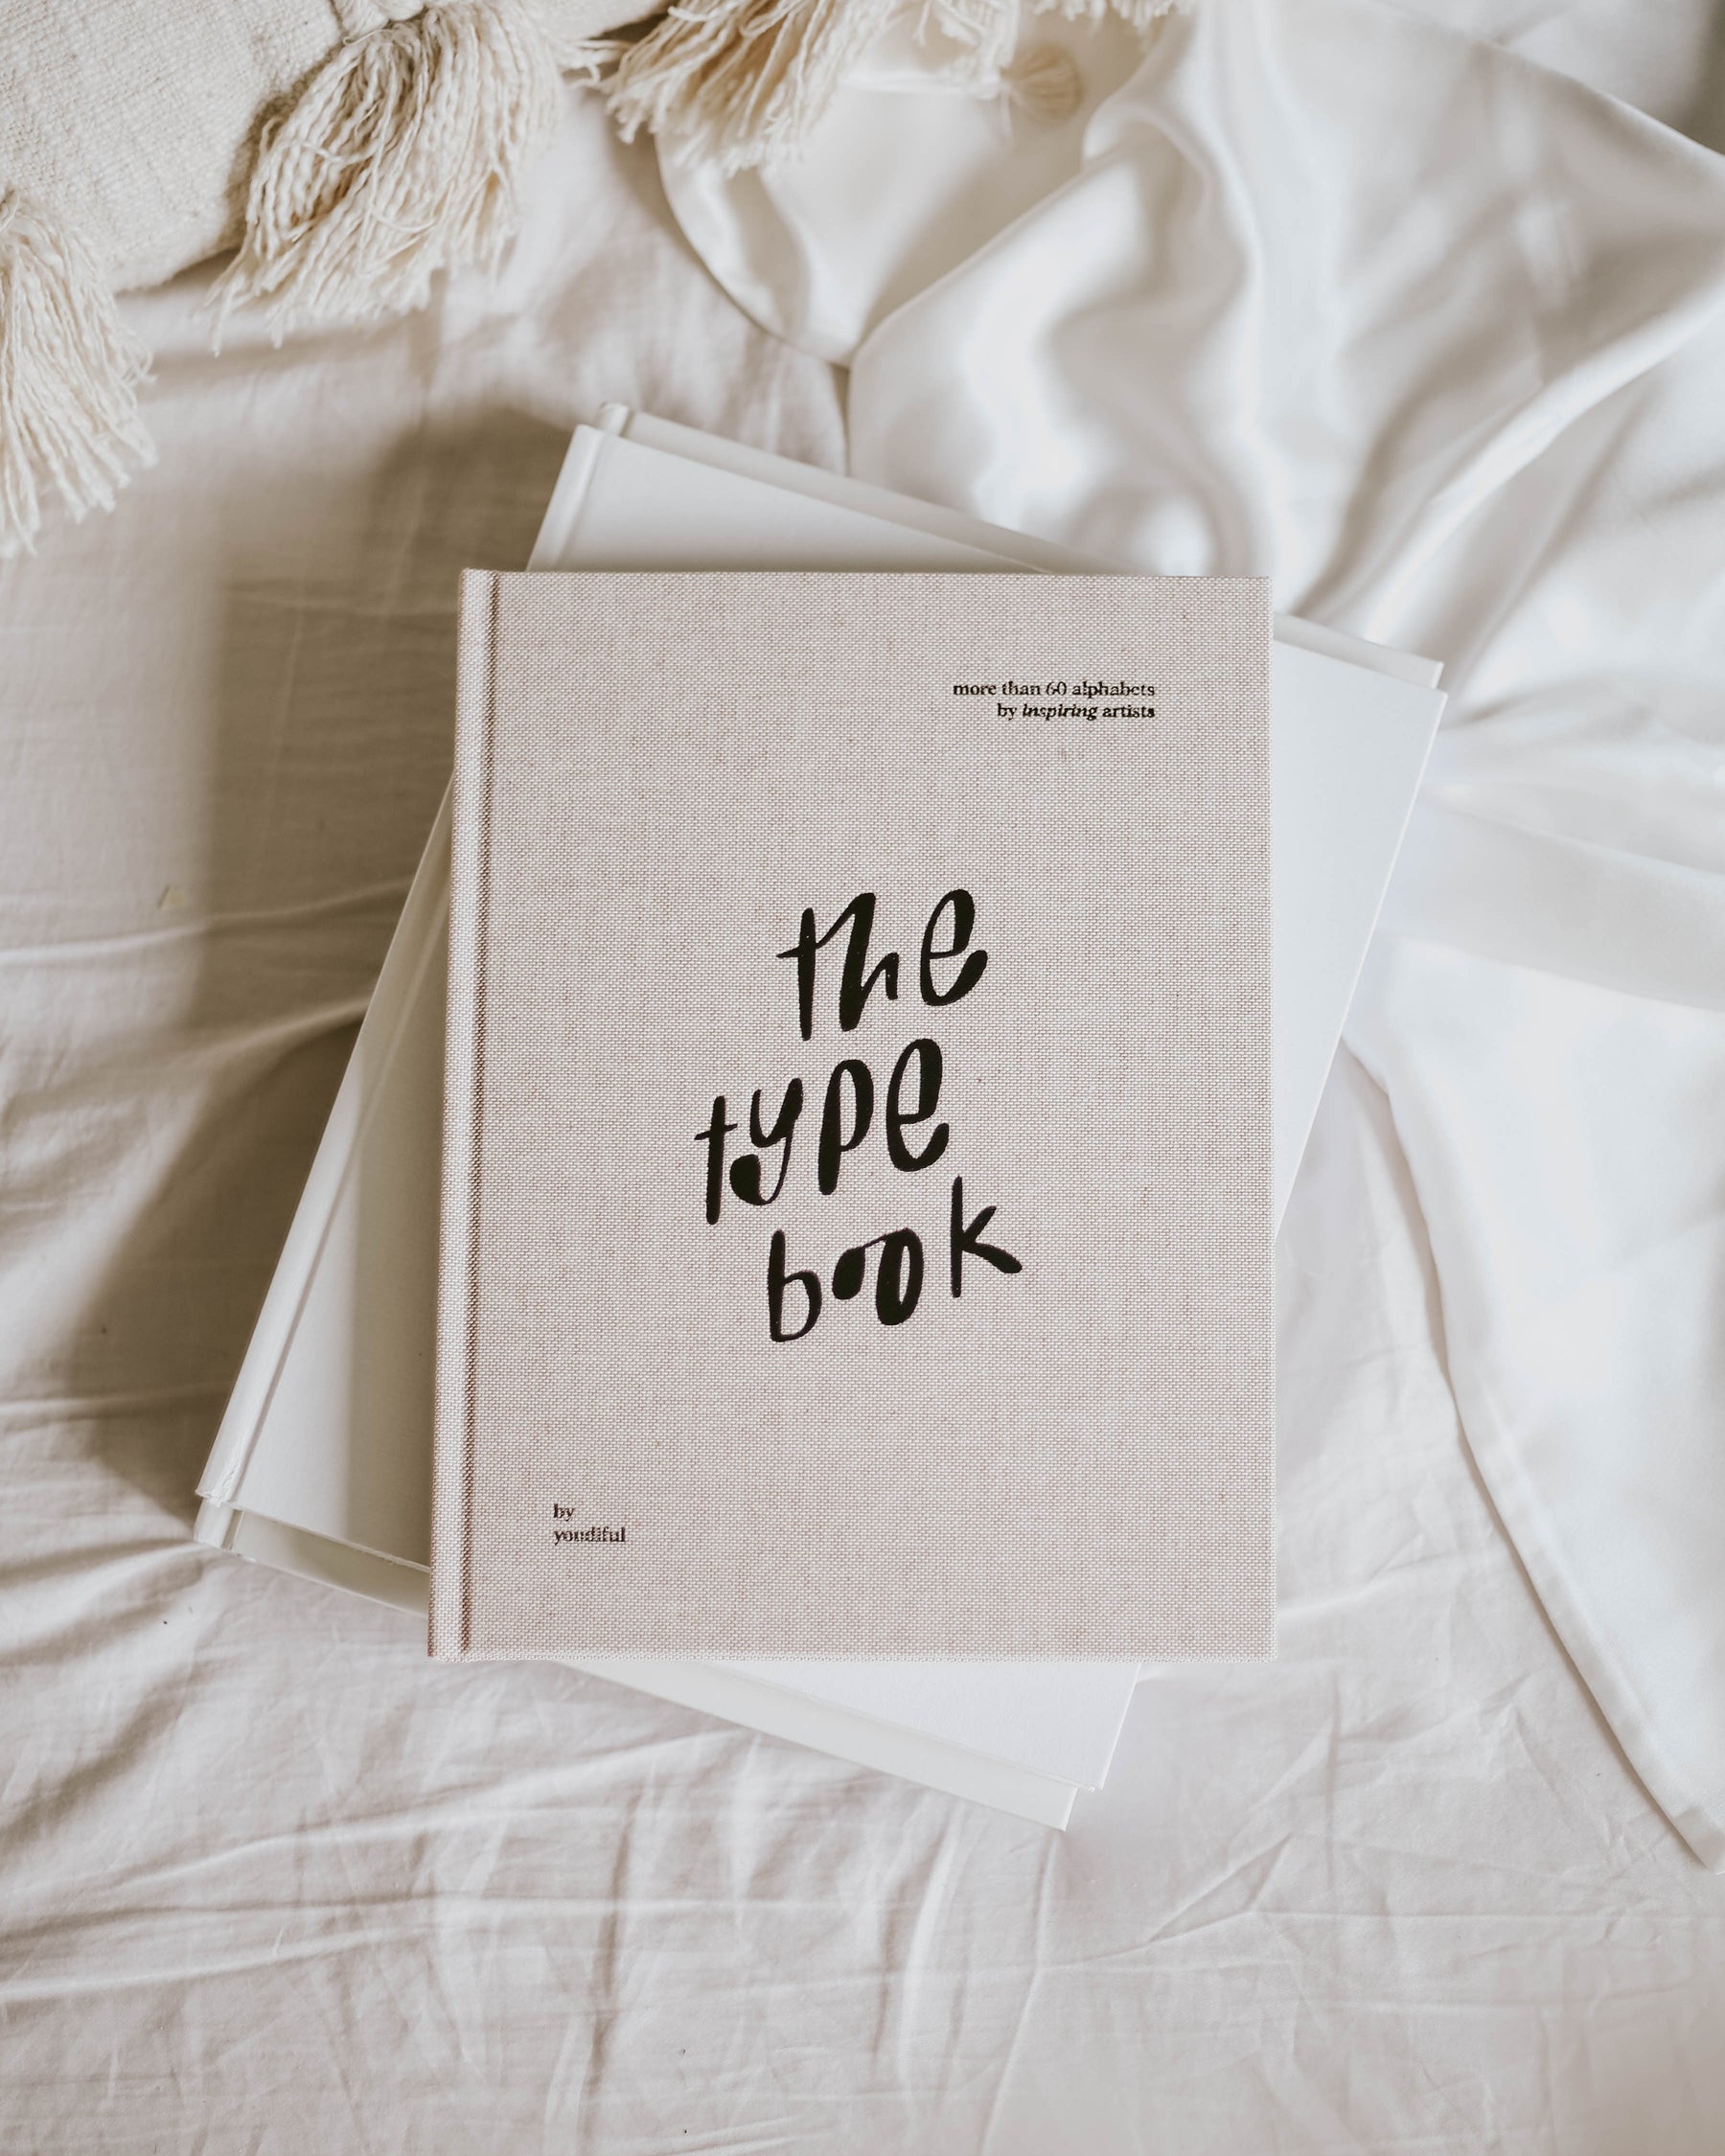 Book　Handlettering　Table　type　